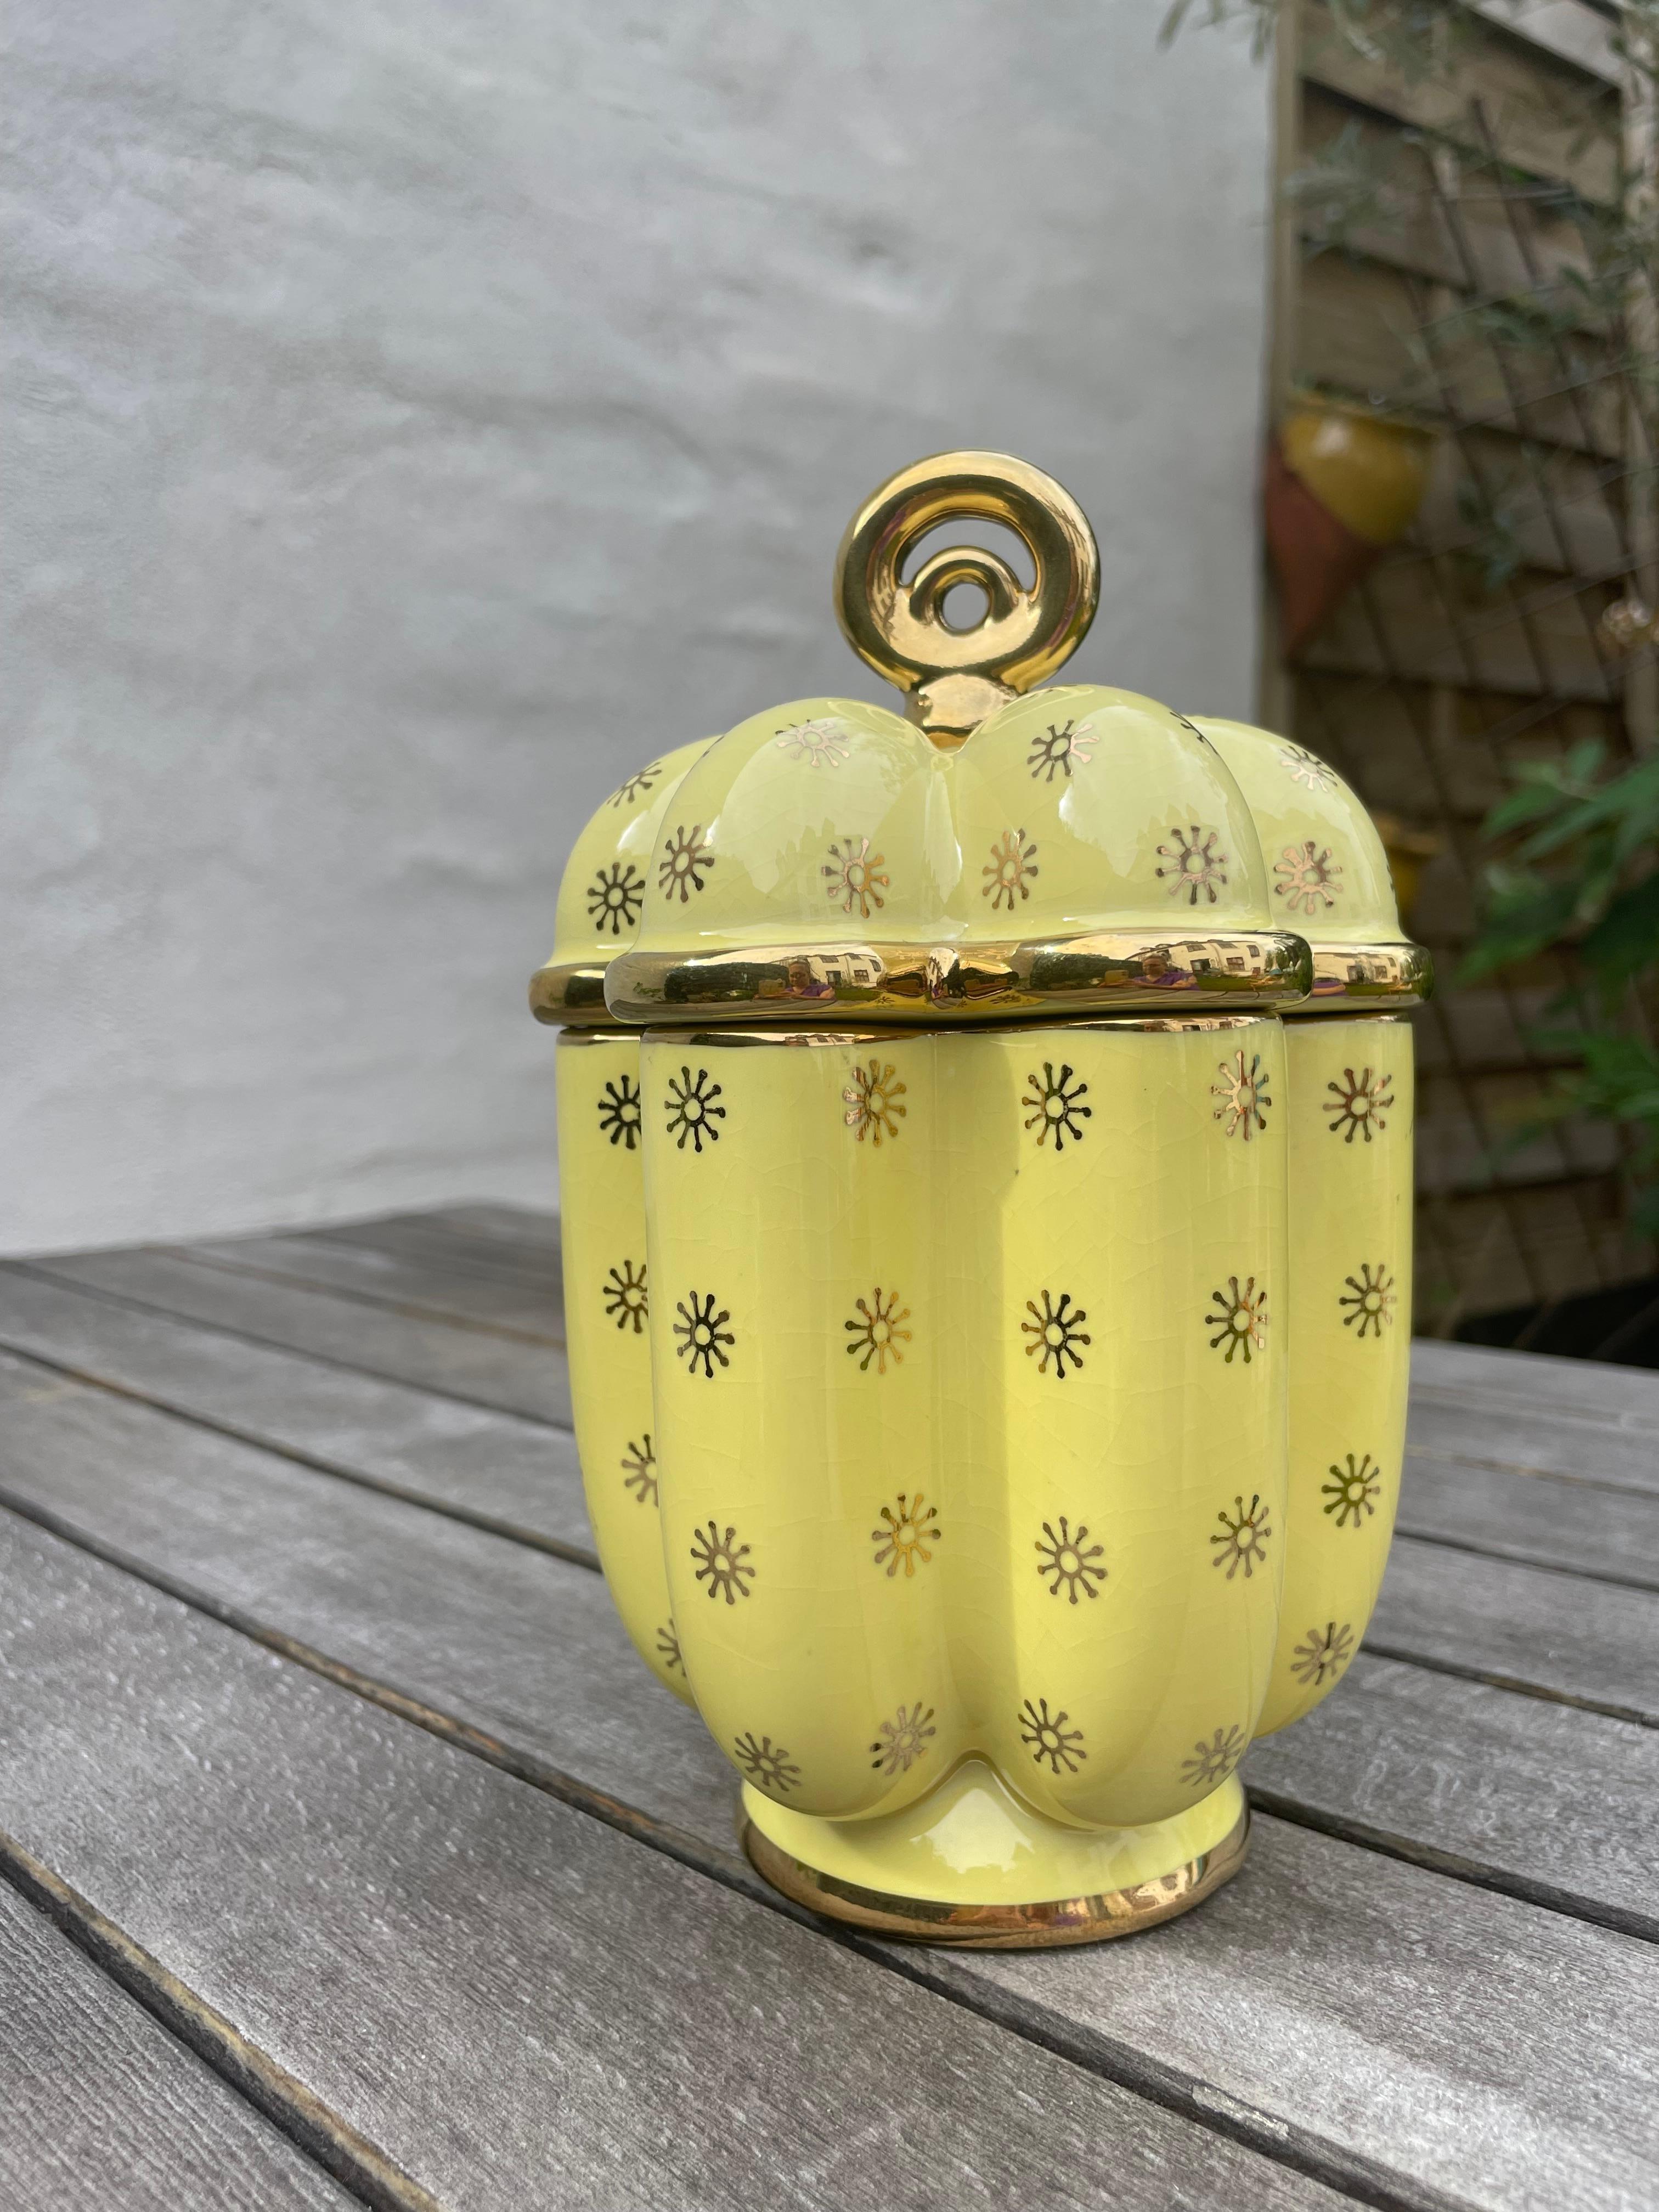 Swedish midcentury modern bright yellow porcelain lidded jar with vertical wavy shape. Stylized golden starshaped flower decor, golden lines and round golden top. Stamped under base. Beautiful vintage condition.
Sweden, 1950s. 